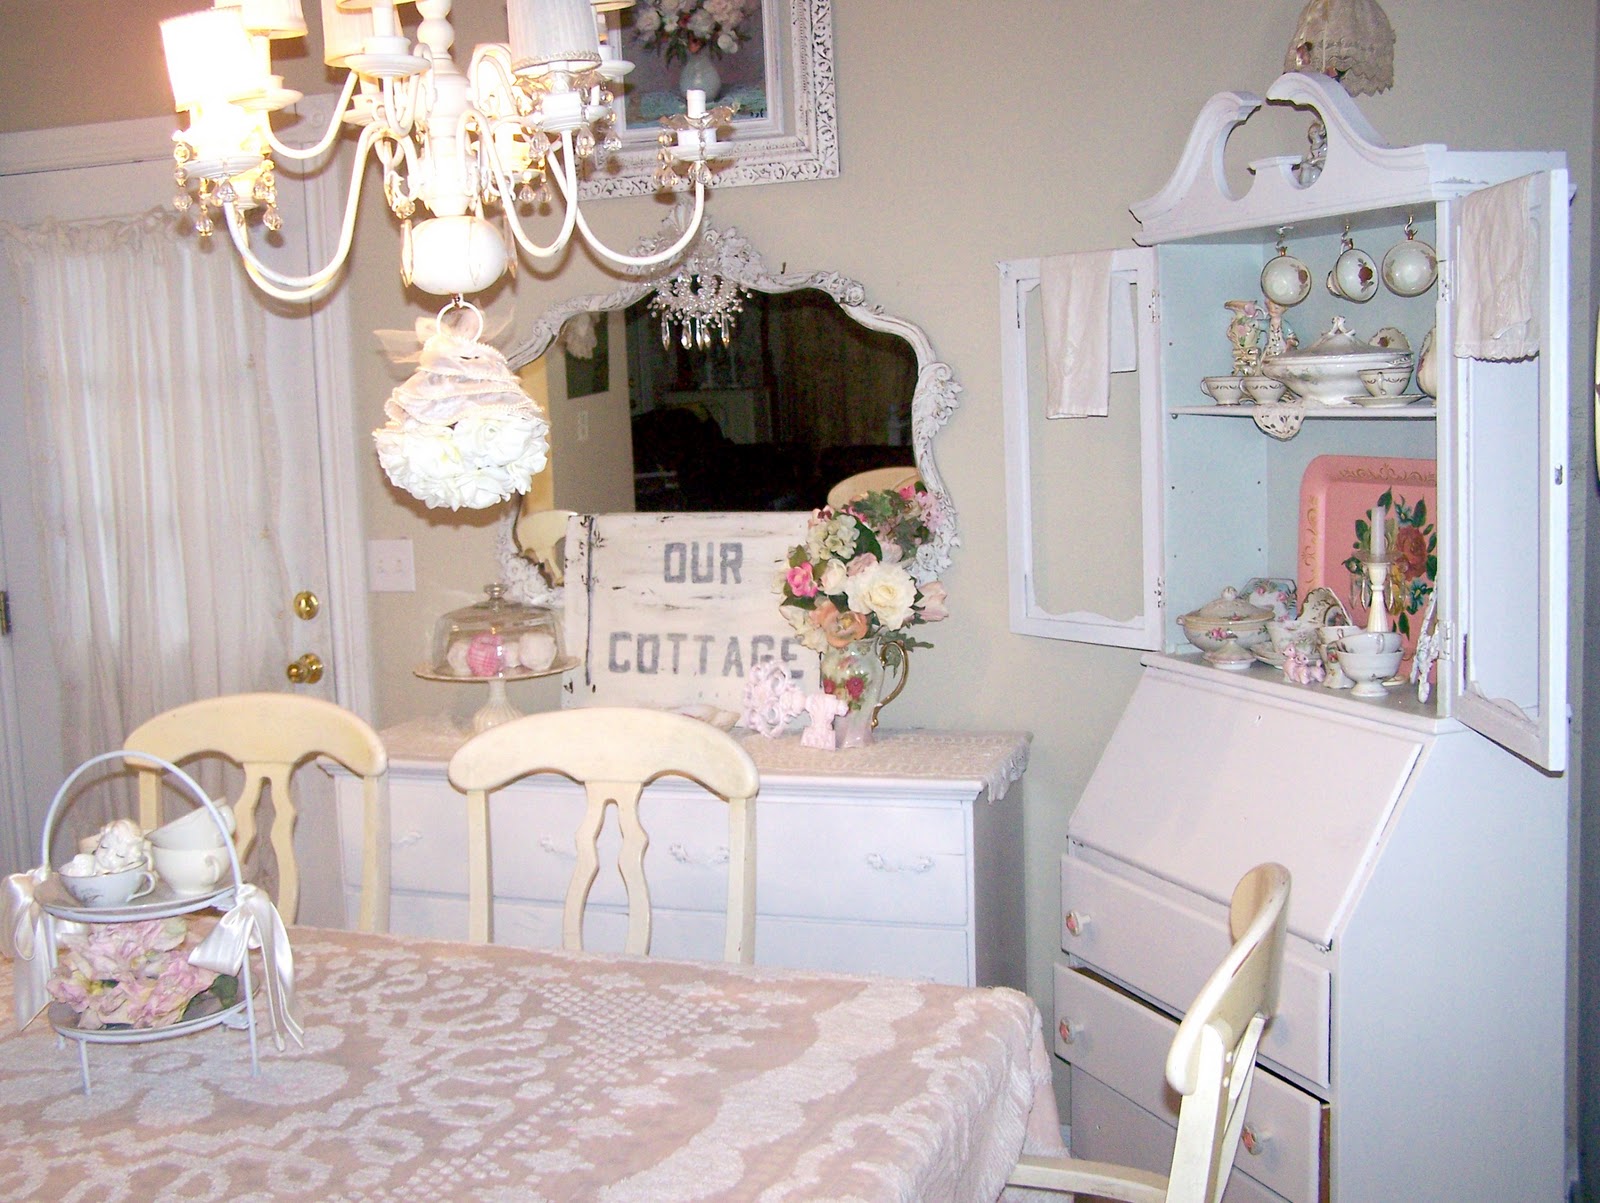 Olivia's Romantic Home: Shabby Chic Cottage Dining Room!